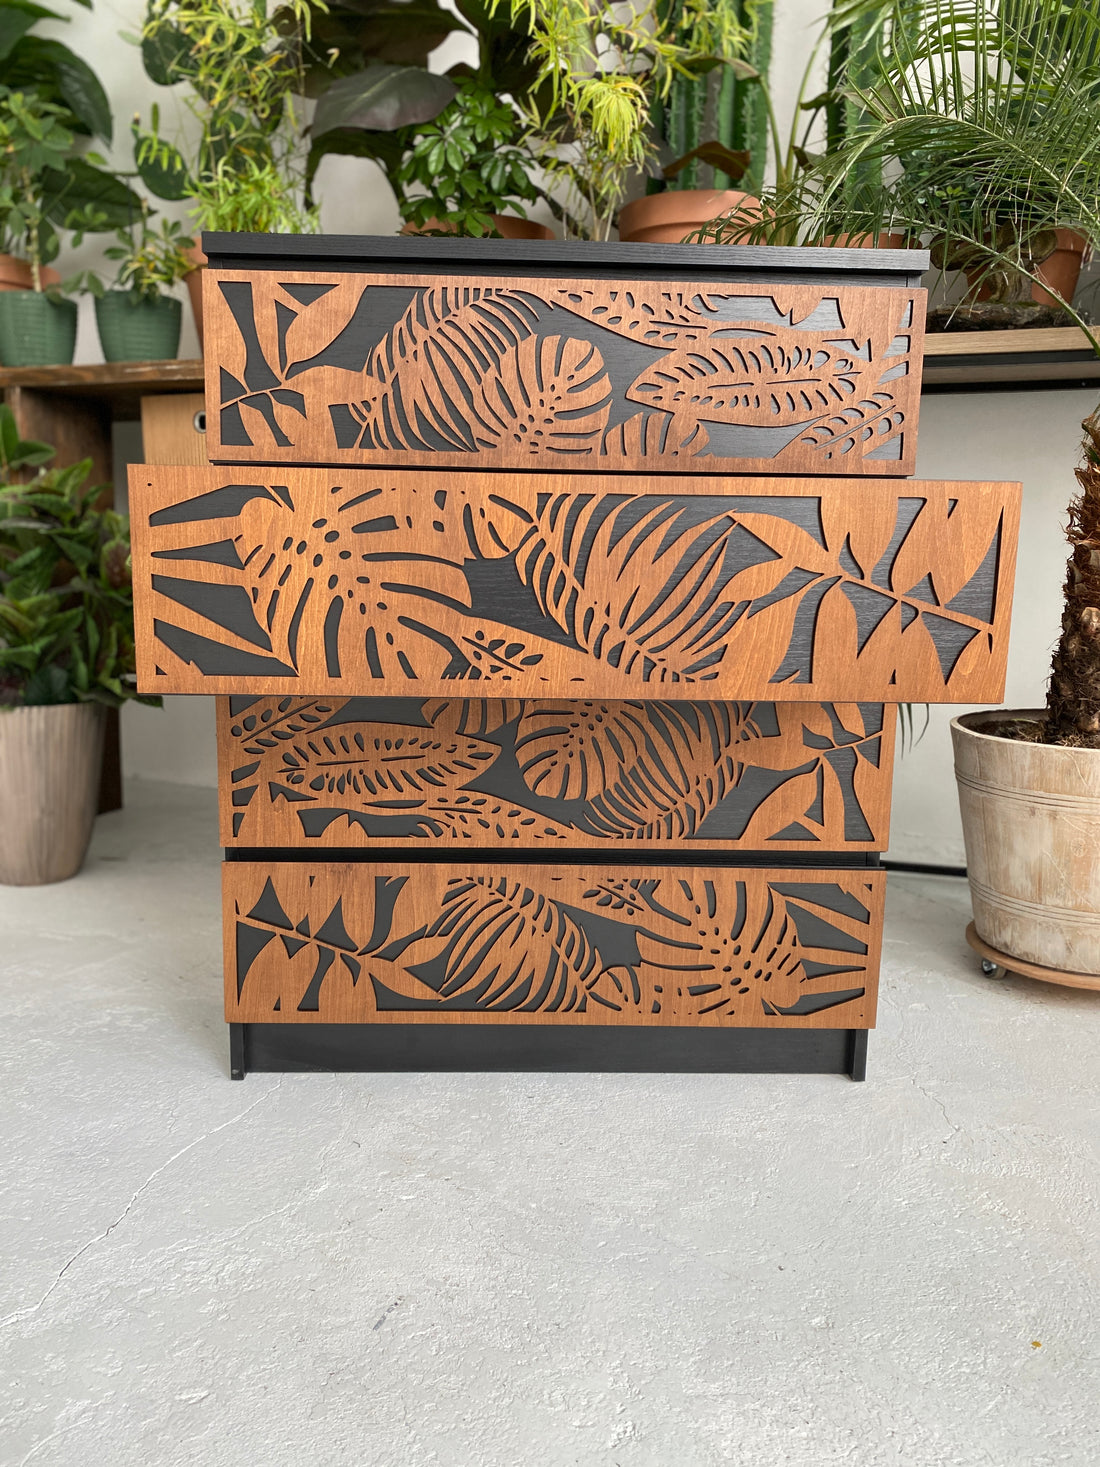 Overlay wooden panels for decorating ikea malm dresser witn tropical pattern